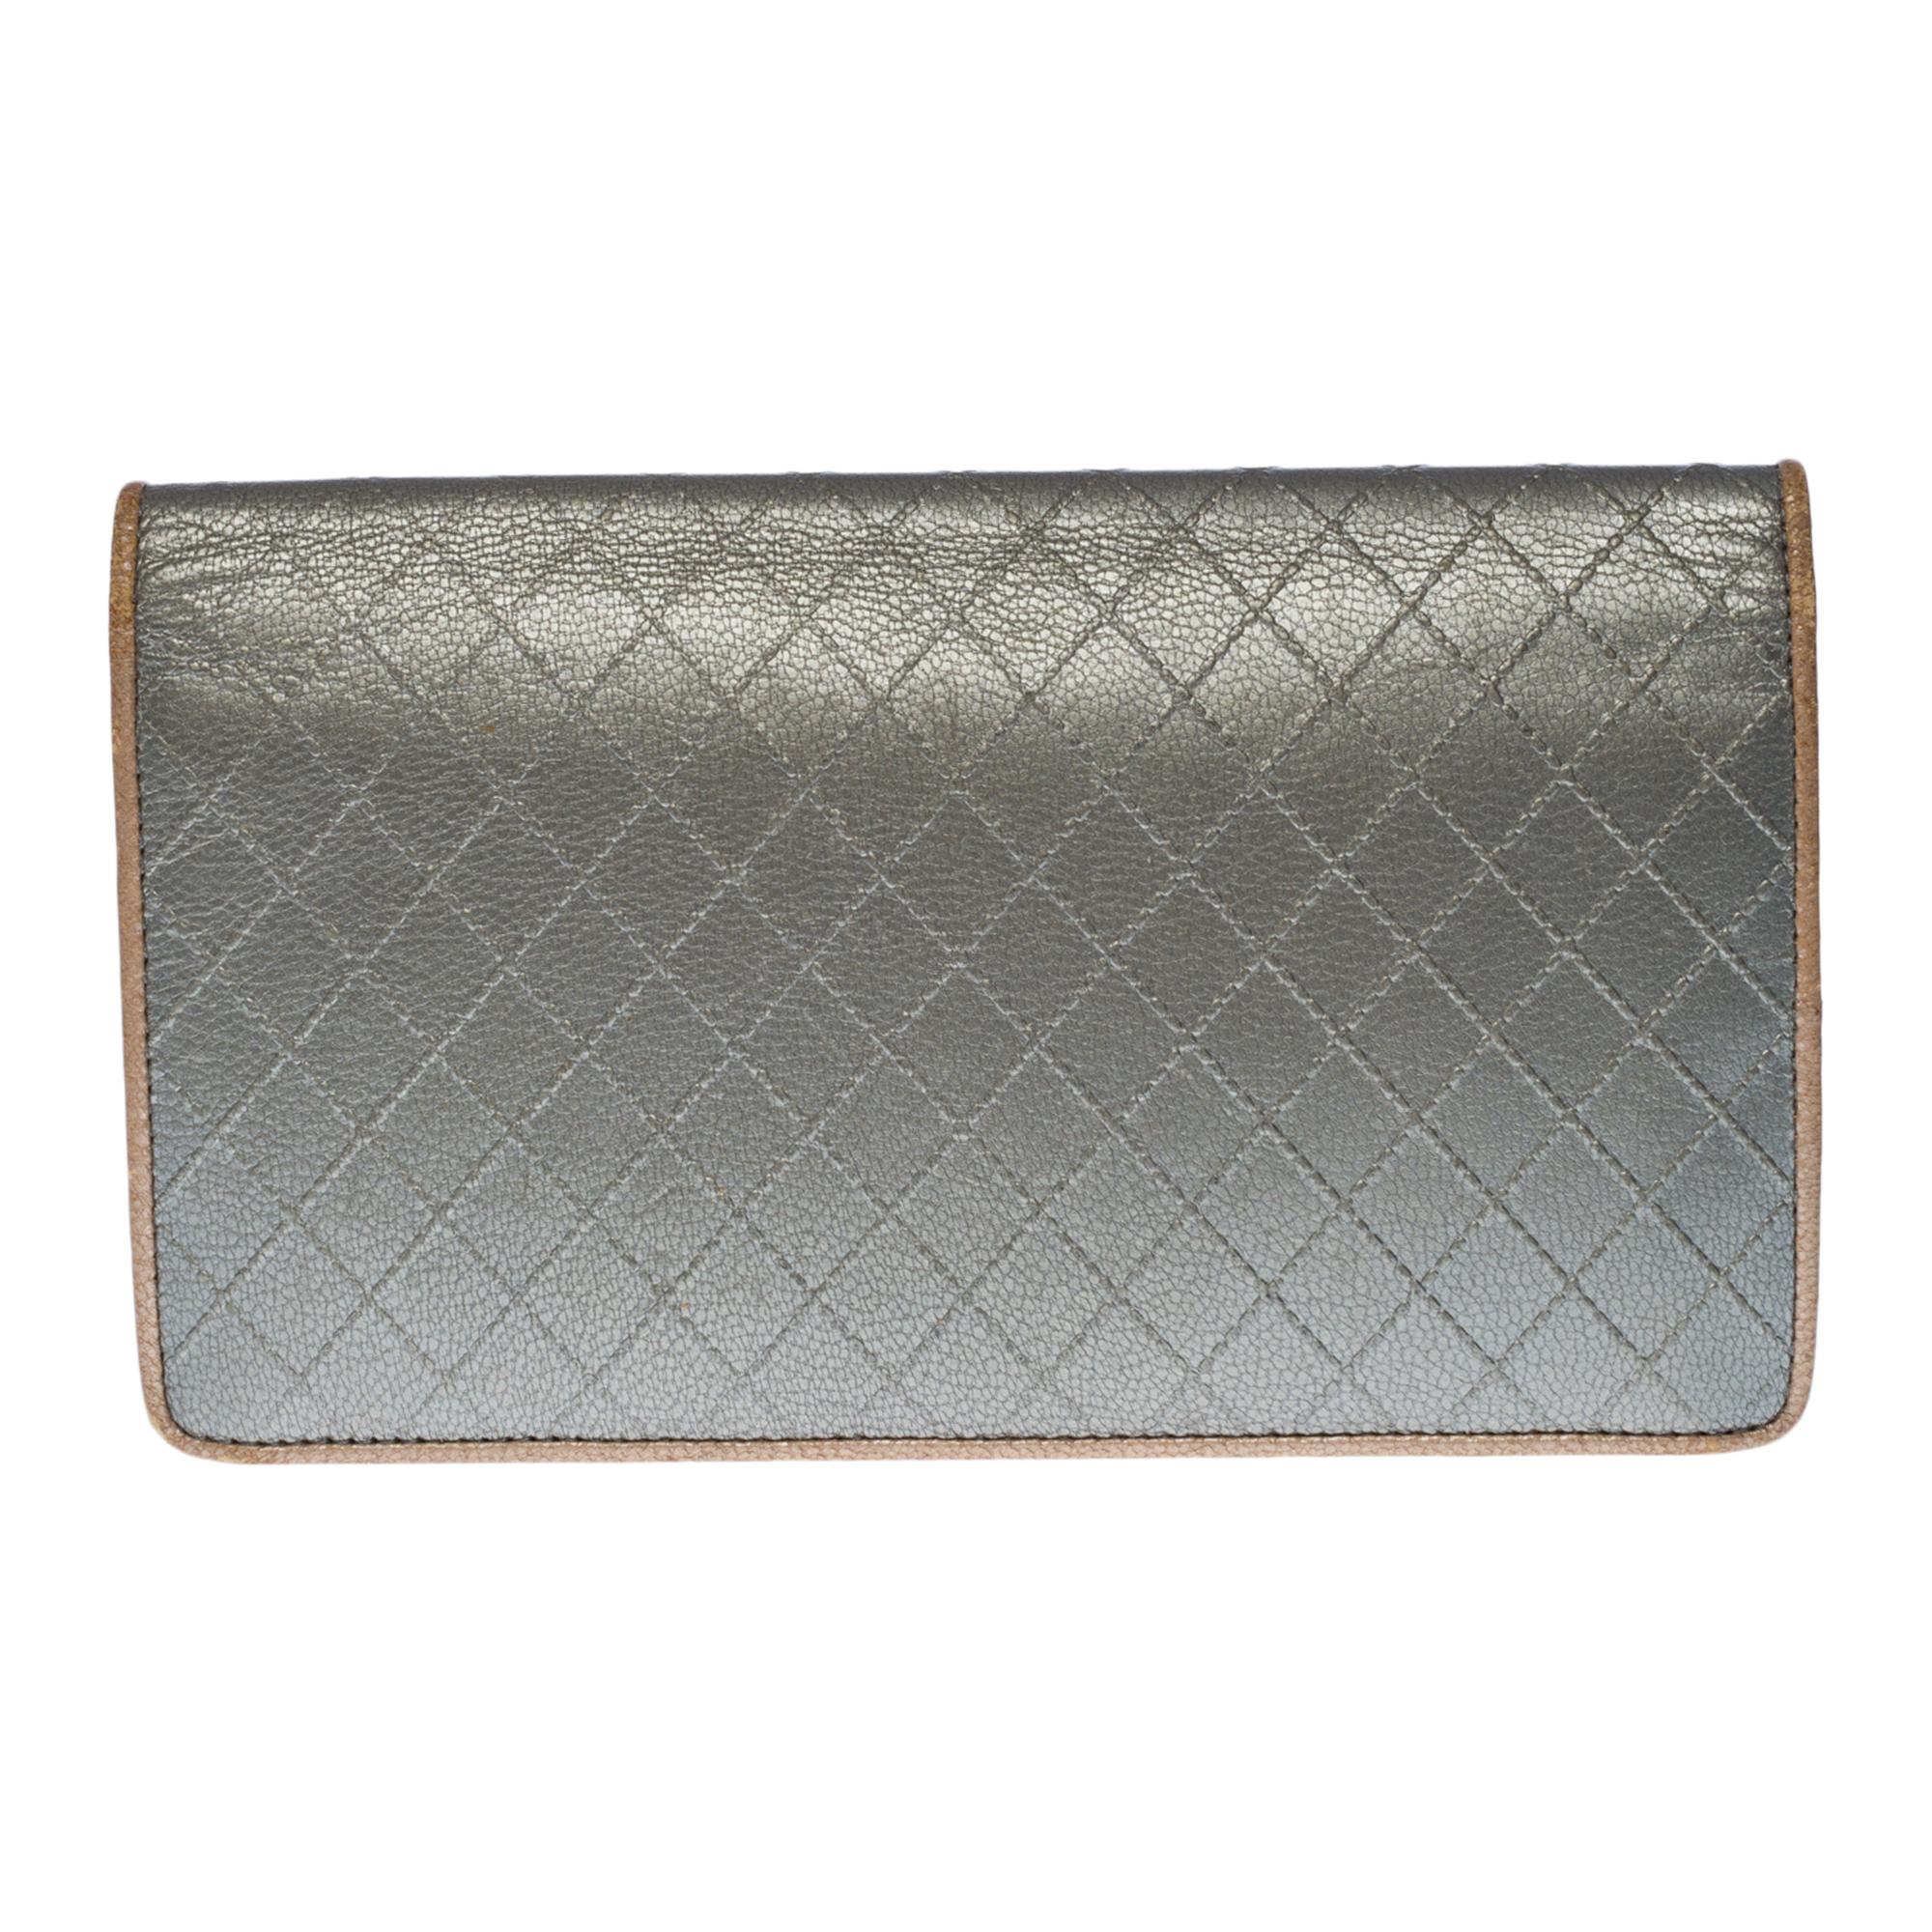 Charming Chanel Wallet in Metallic Silver leather Flap and Silver Metal Flap
Gold-tone lambskin interior with storage compartment for 8 credit cards, 5 patch pockets, 1 coin zipped compartment
Inside logo and border piping in gold leather
Signature: